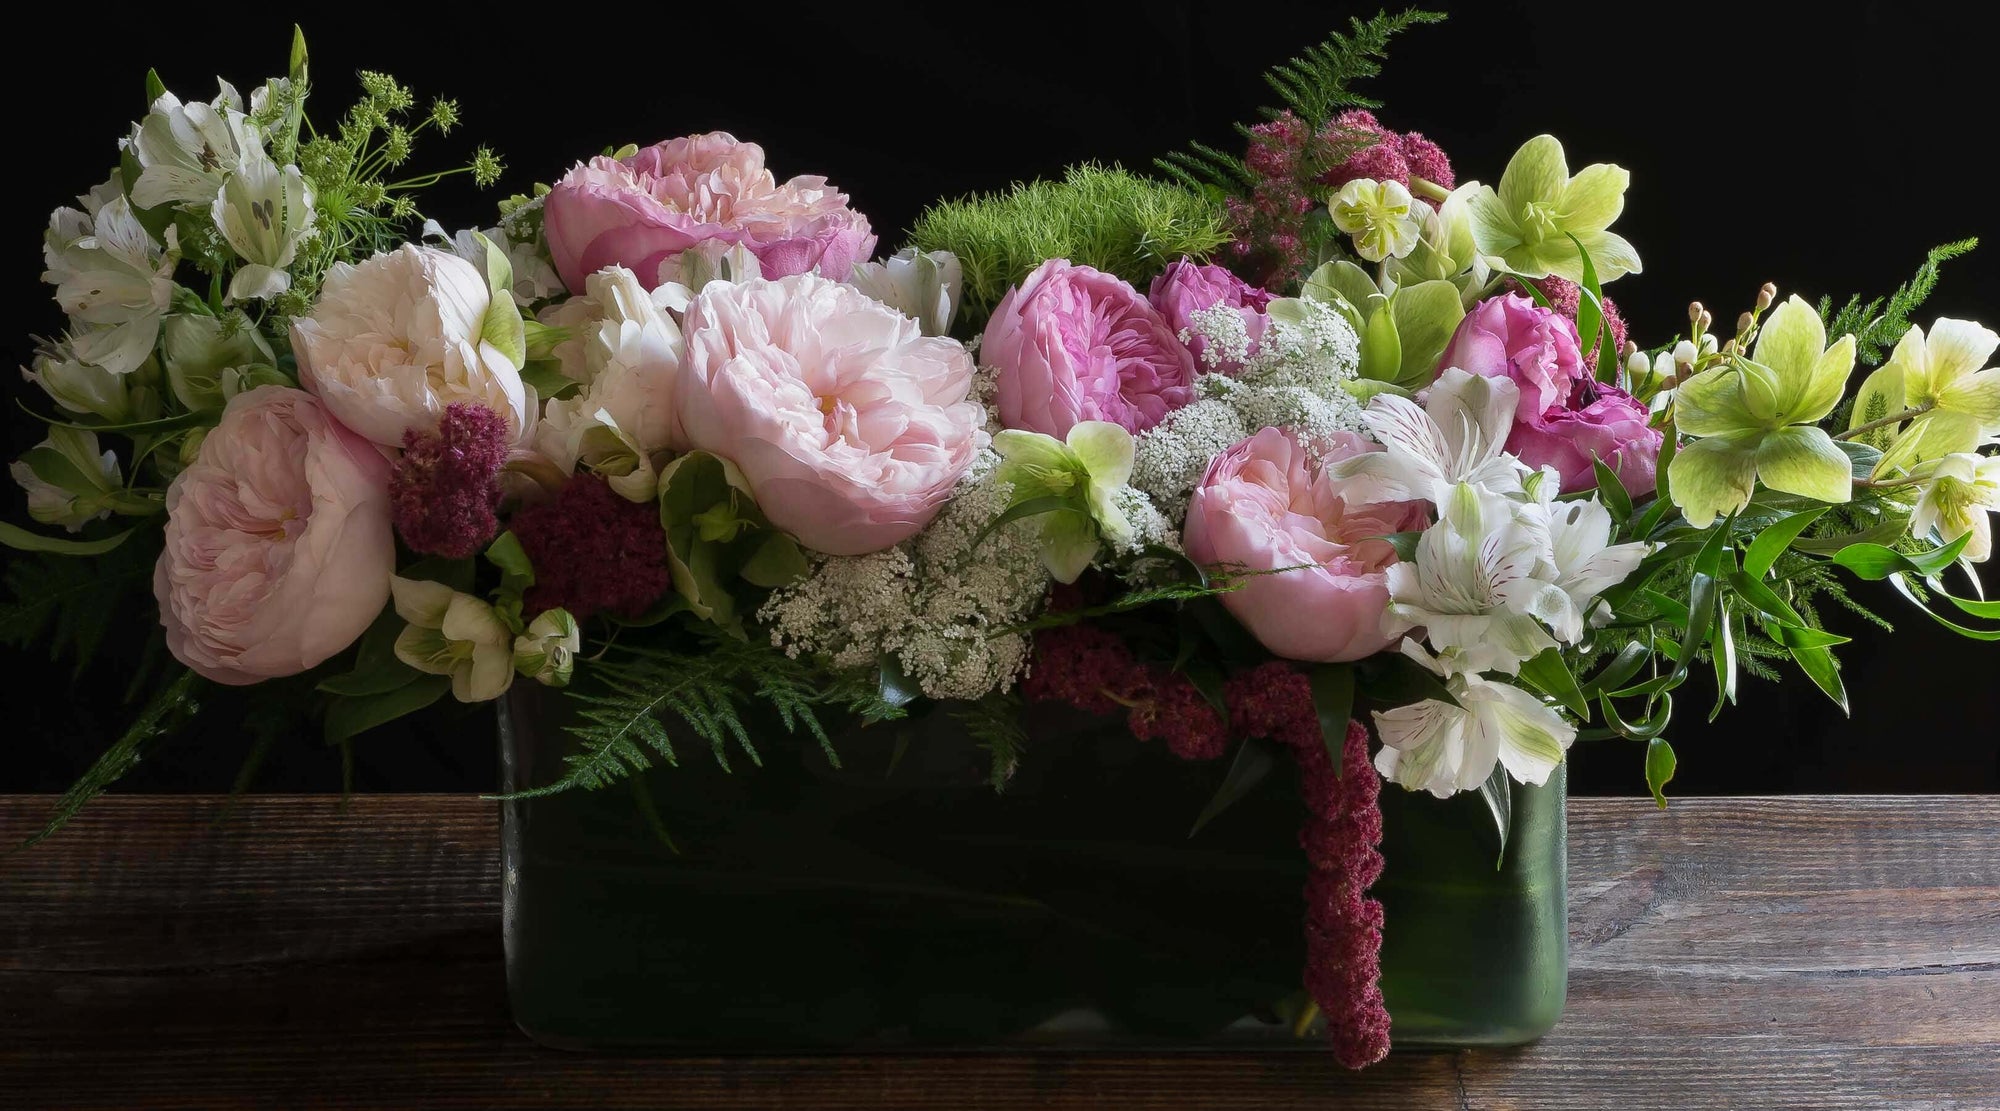 Colorful luxury boutique floral arrangement for Mother's Day using the best premium flowers - blush pink, peach, white  flowers